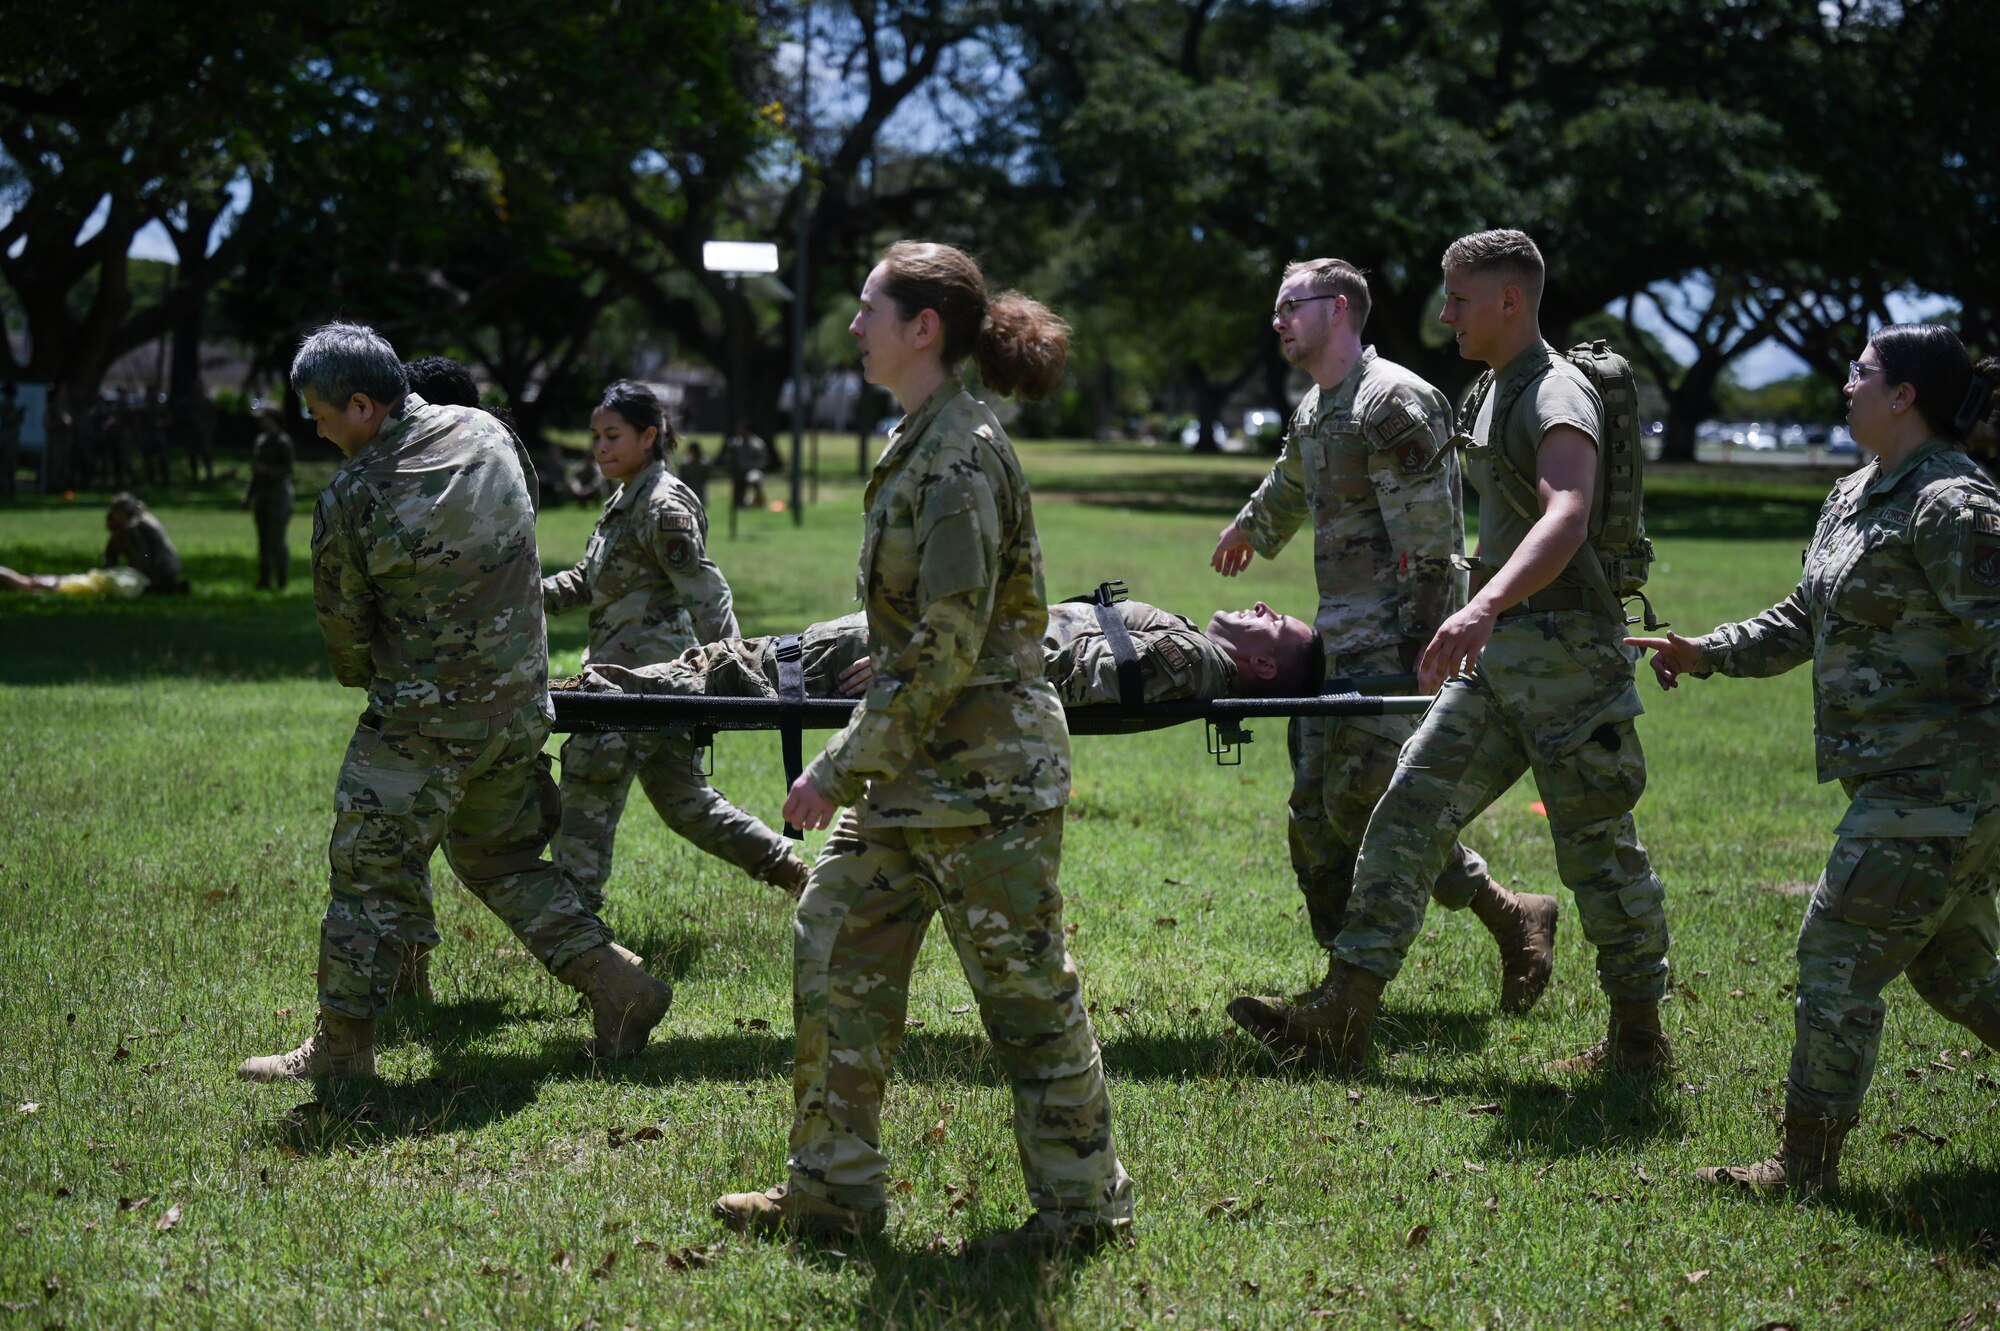 Airmen assigned to the 15th Medical Group perform a litter carry during a Tactical Combat Casualty Care and Ability to Survive and Operate relay at Joint Base Pearl Harbor-Hickam, Hawaii, April 17, 2024. The relay was part of a medical skills rodeo that tested the Airmen’s capabilities to perform effective trauma care during combat situations. (U.S. Air Force photo by Staff Sgt. Alan Ricker)